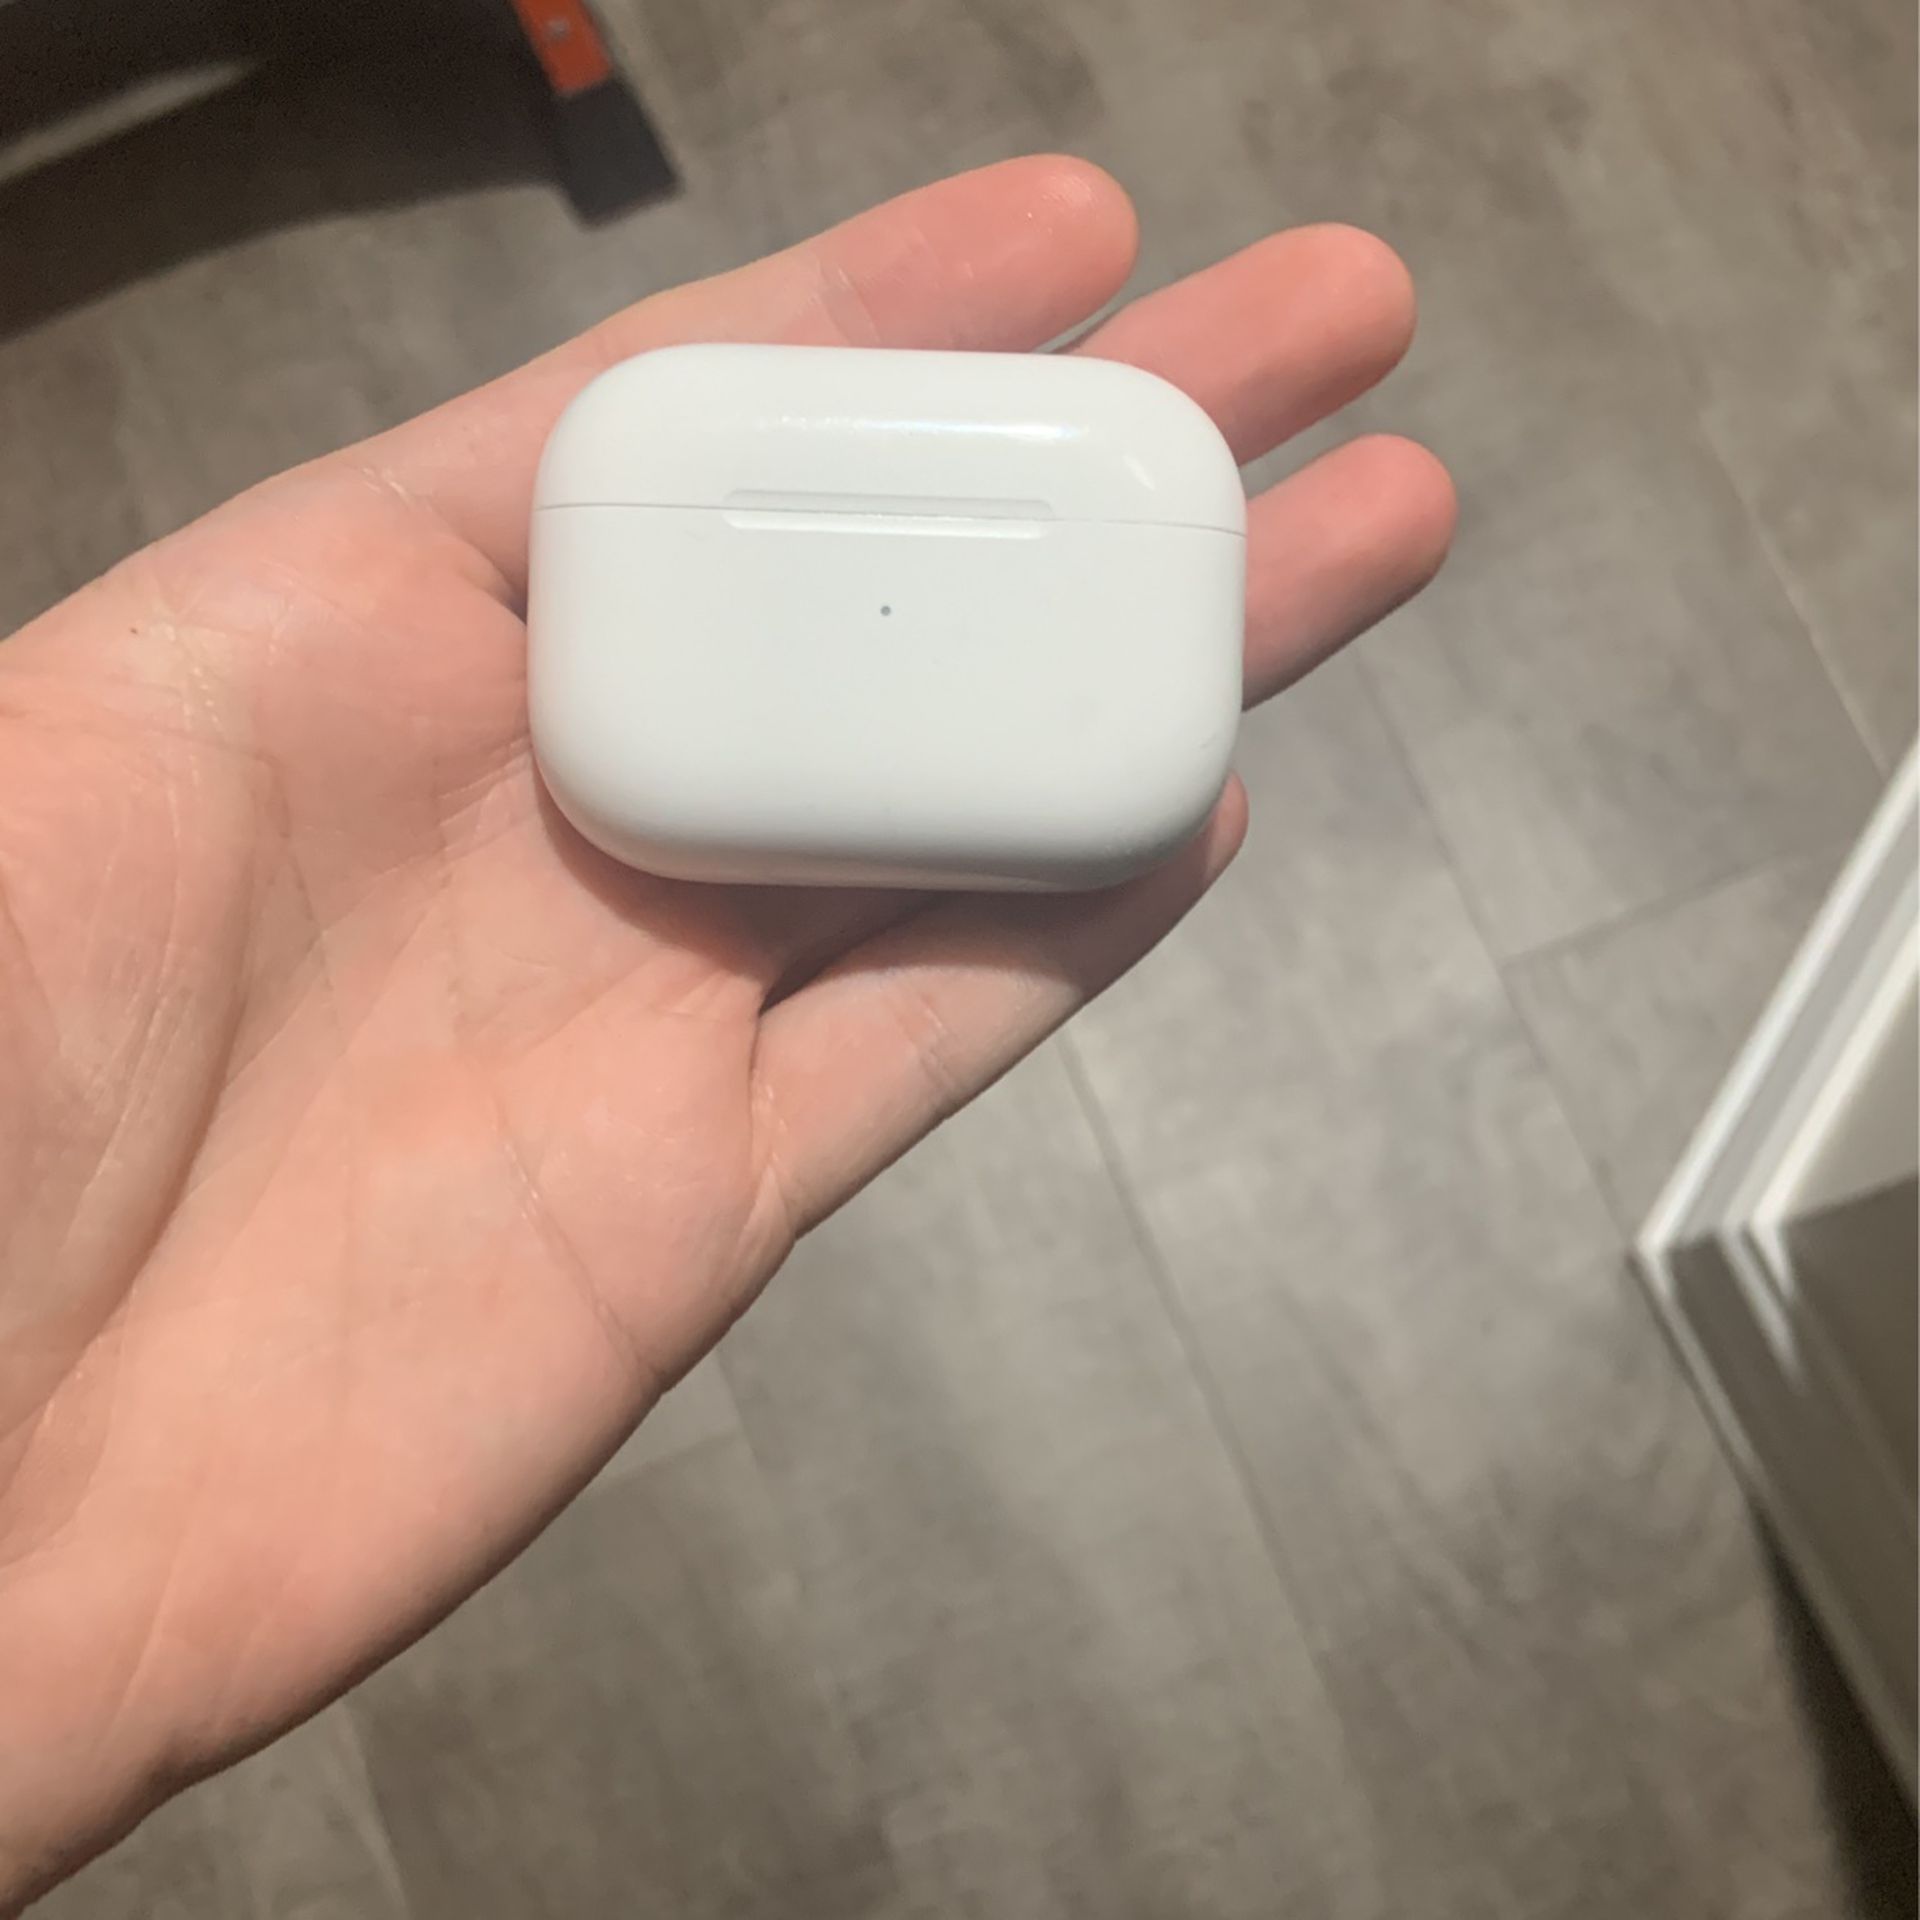 Airpod Pros (used)